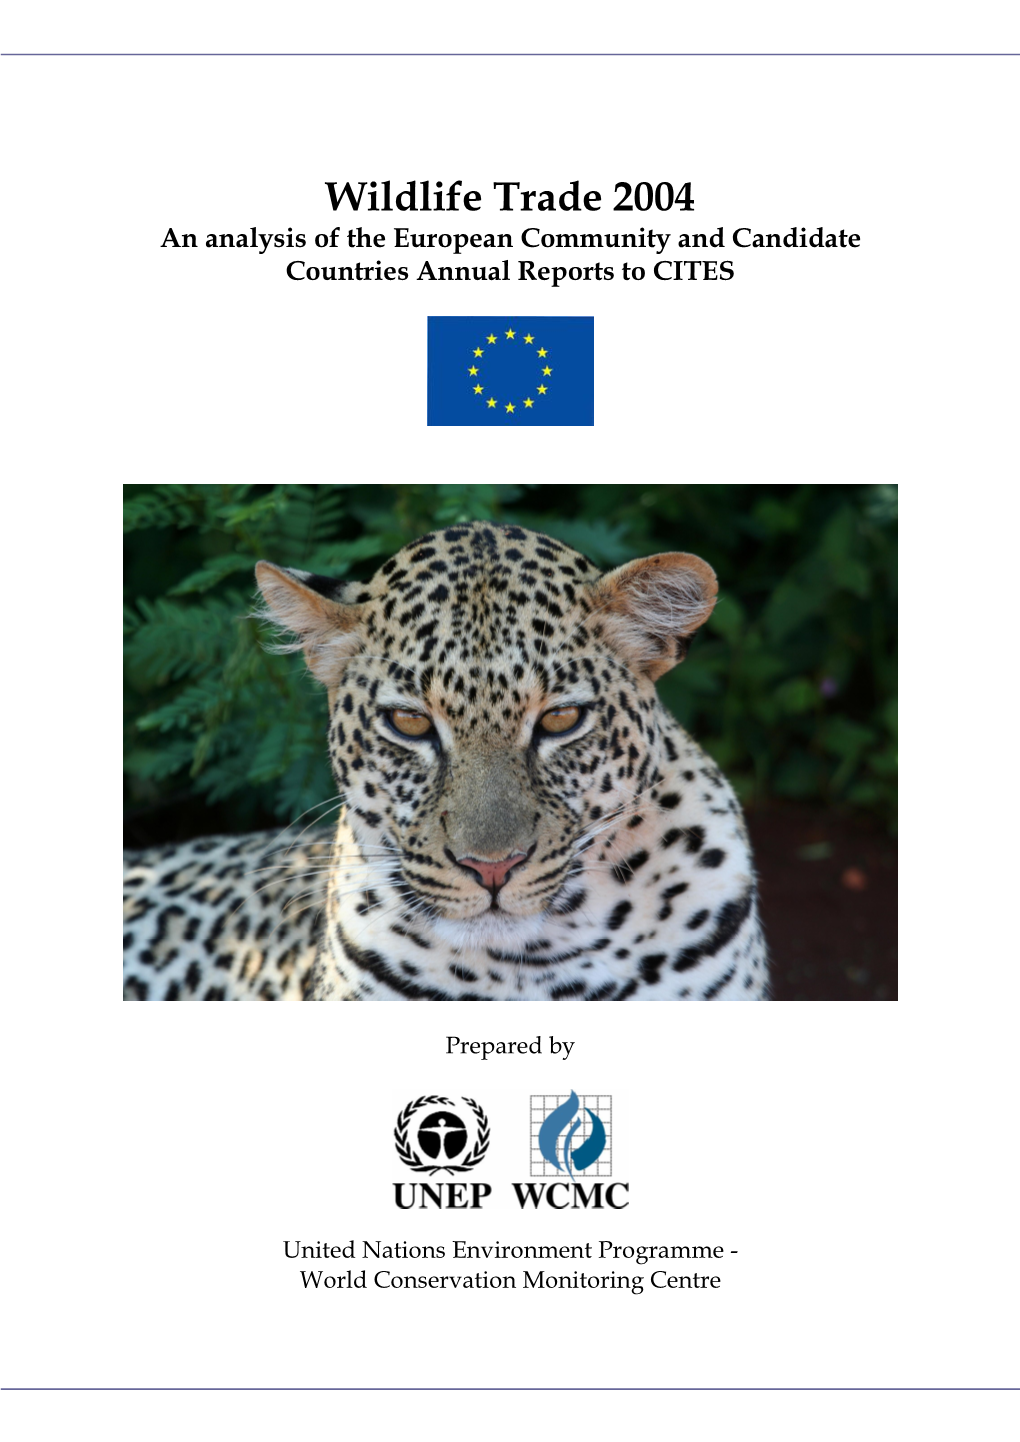 Wildlife Trade 2004 an Analysis of the European Community and Candidate Countries Annual Reports to CITES